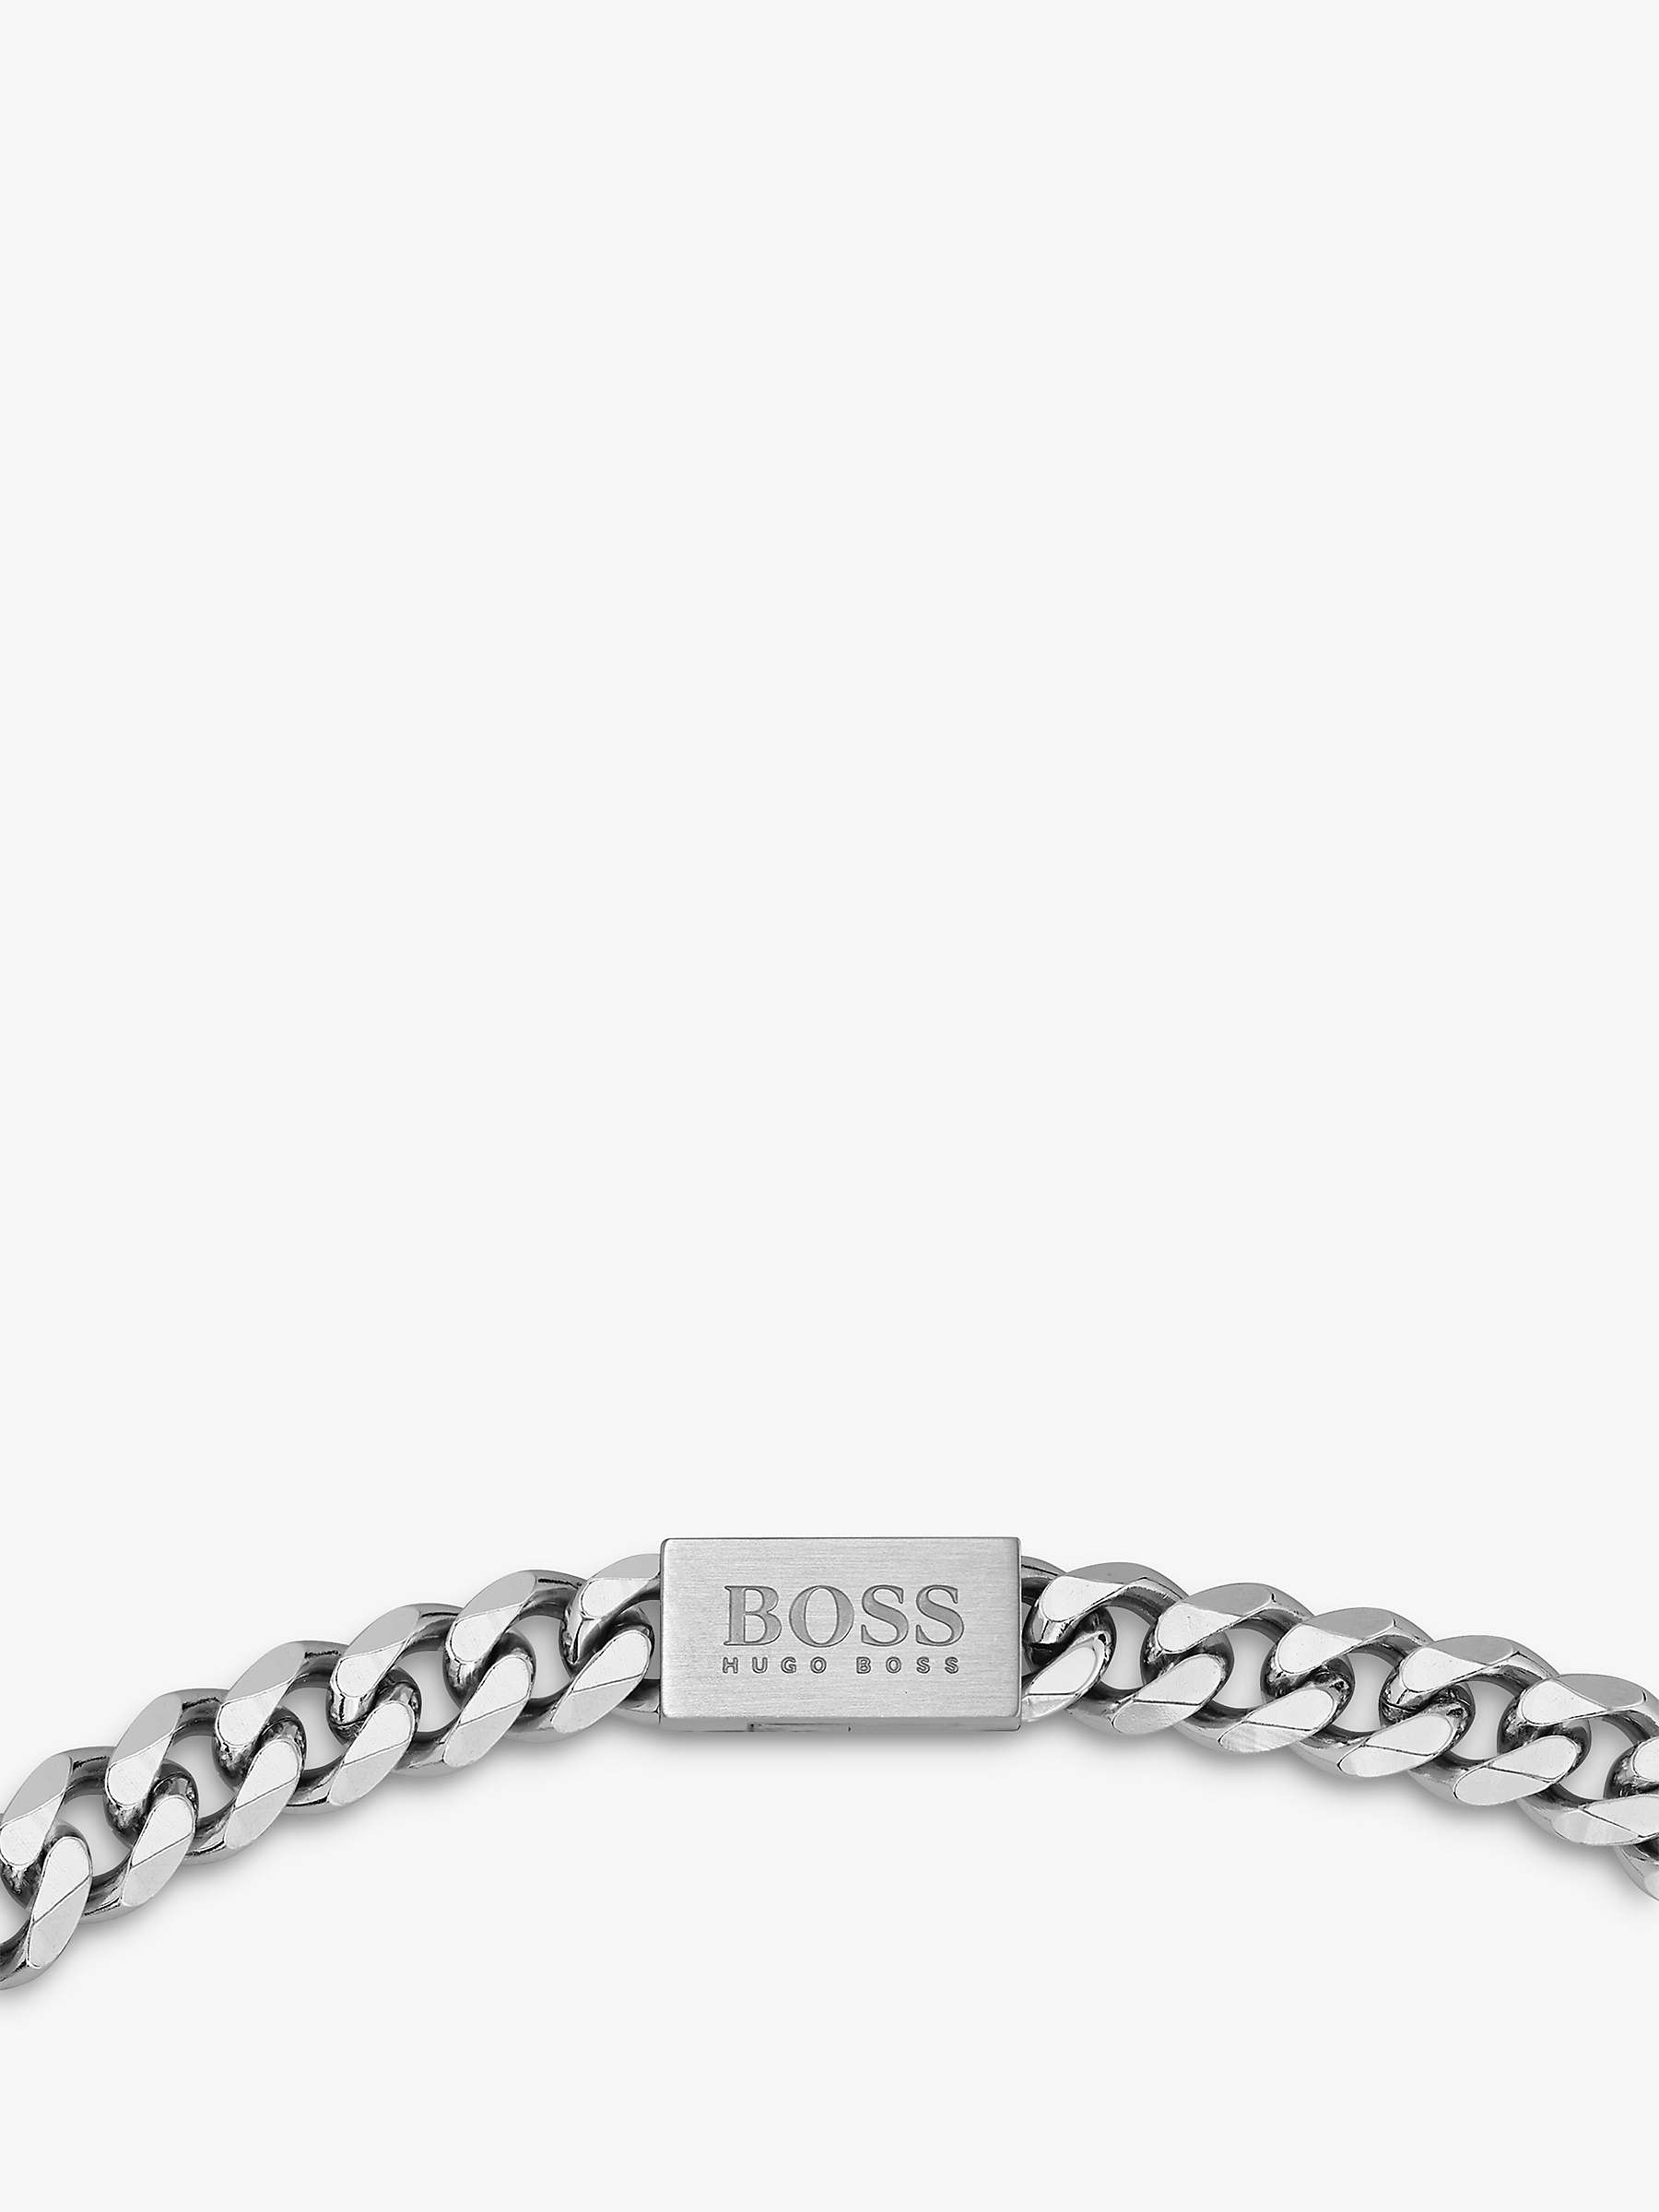 Buy BOSS Men's Curb Chain Necklace, Silver Online at johnlewis.com